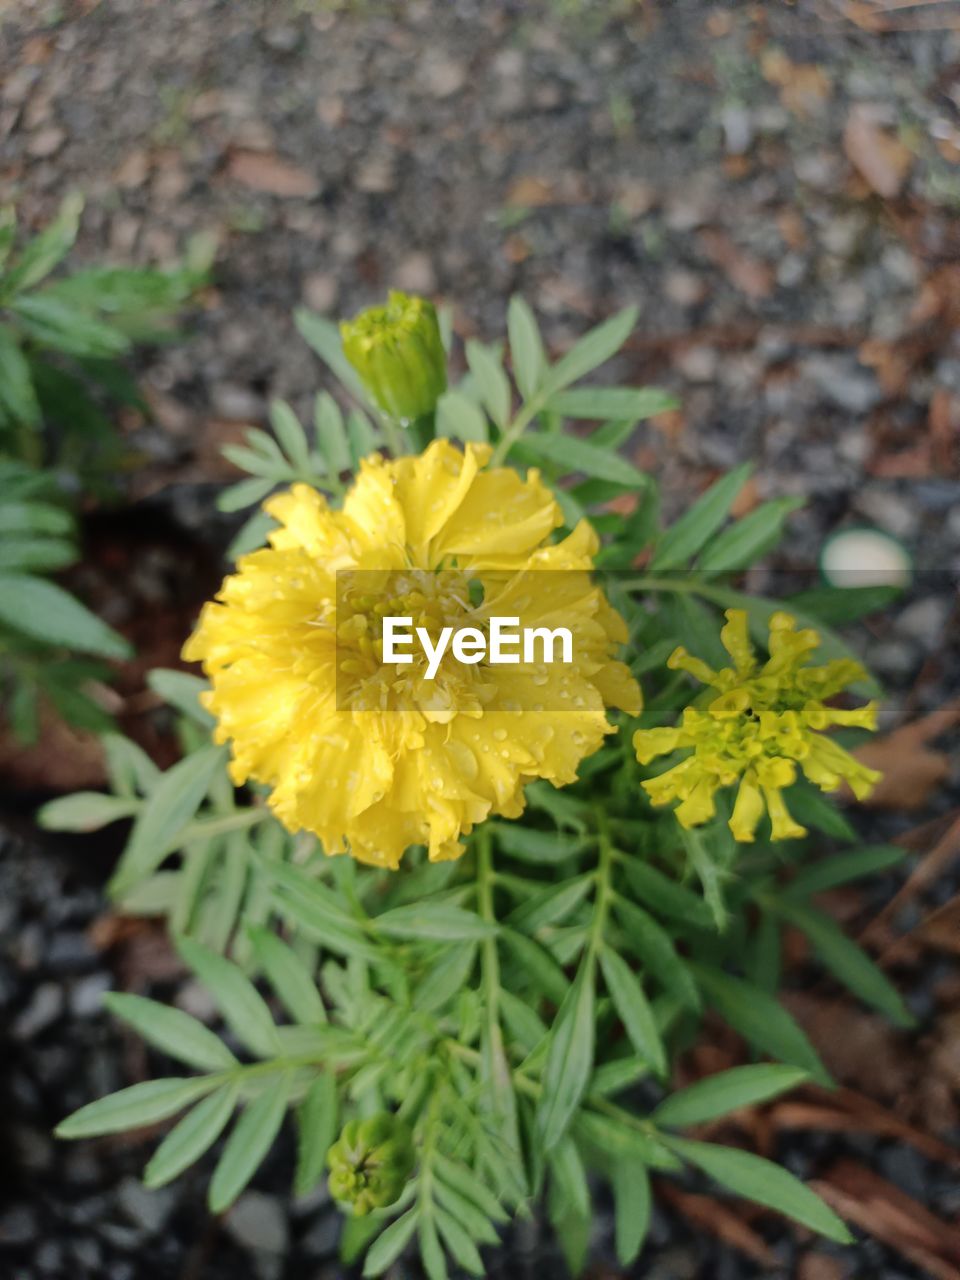 Flower Head Flower Yellow Petal Leaf Botany Close-up Plant Green Color Marigold Blooming Pollen Blossom Flower Market Cosmos Flower